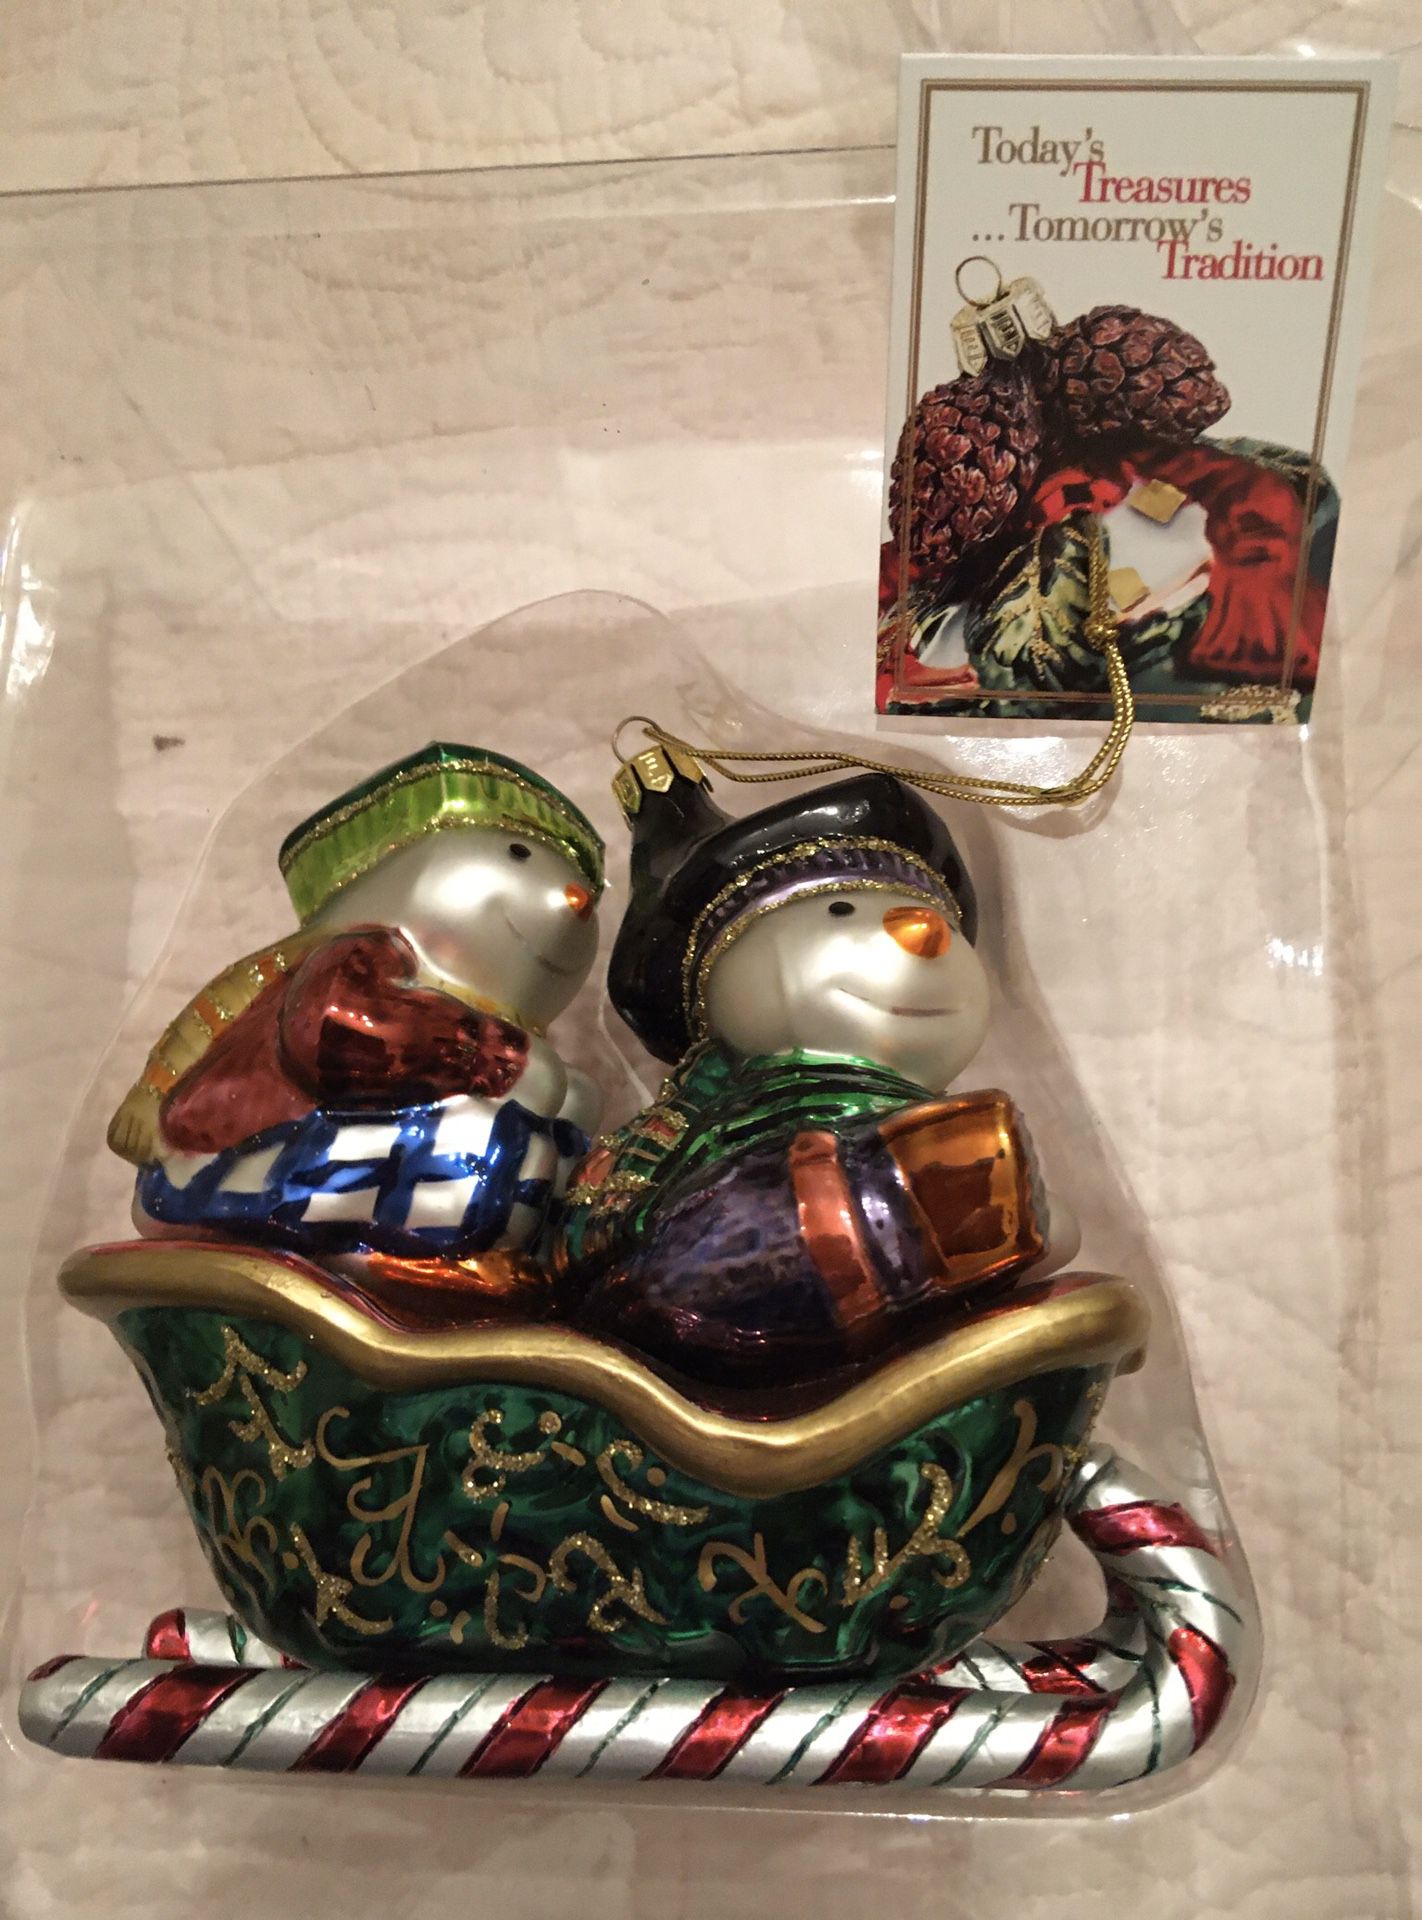 Fitz and Floyd glass Christmas Ornament “Snow Kids on Sleigh” collectible!